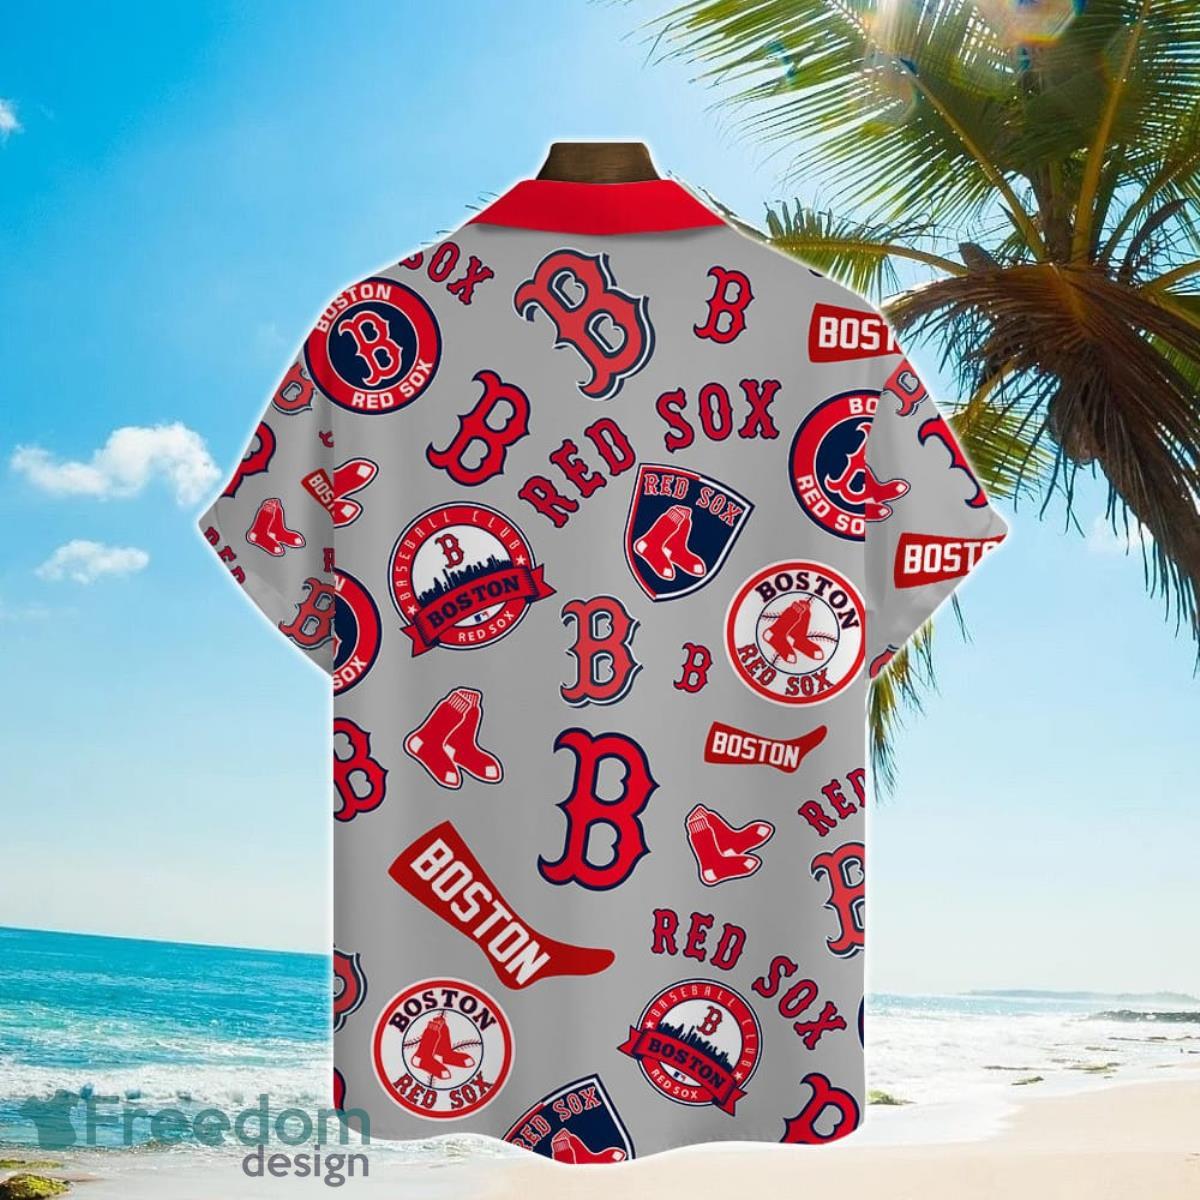 Boston Red Sox Hanging Sox MLB Logo Jersey Sleeve Patch Licensed